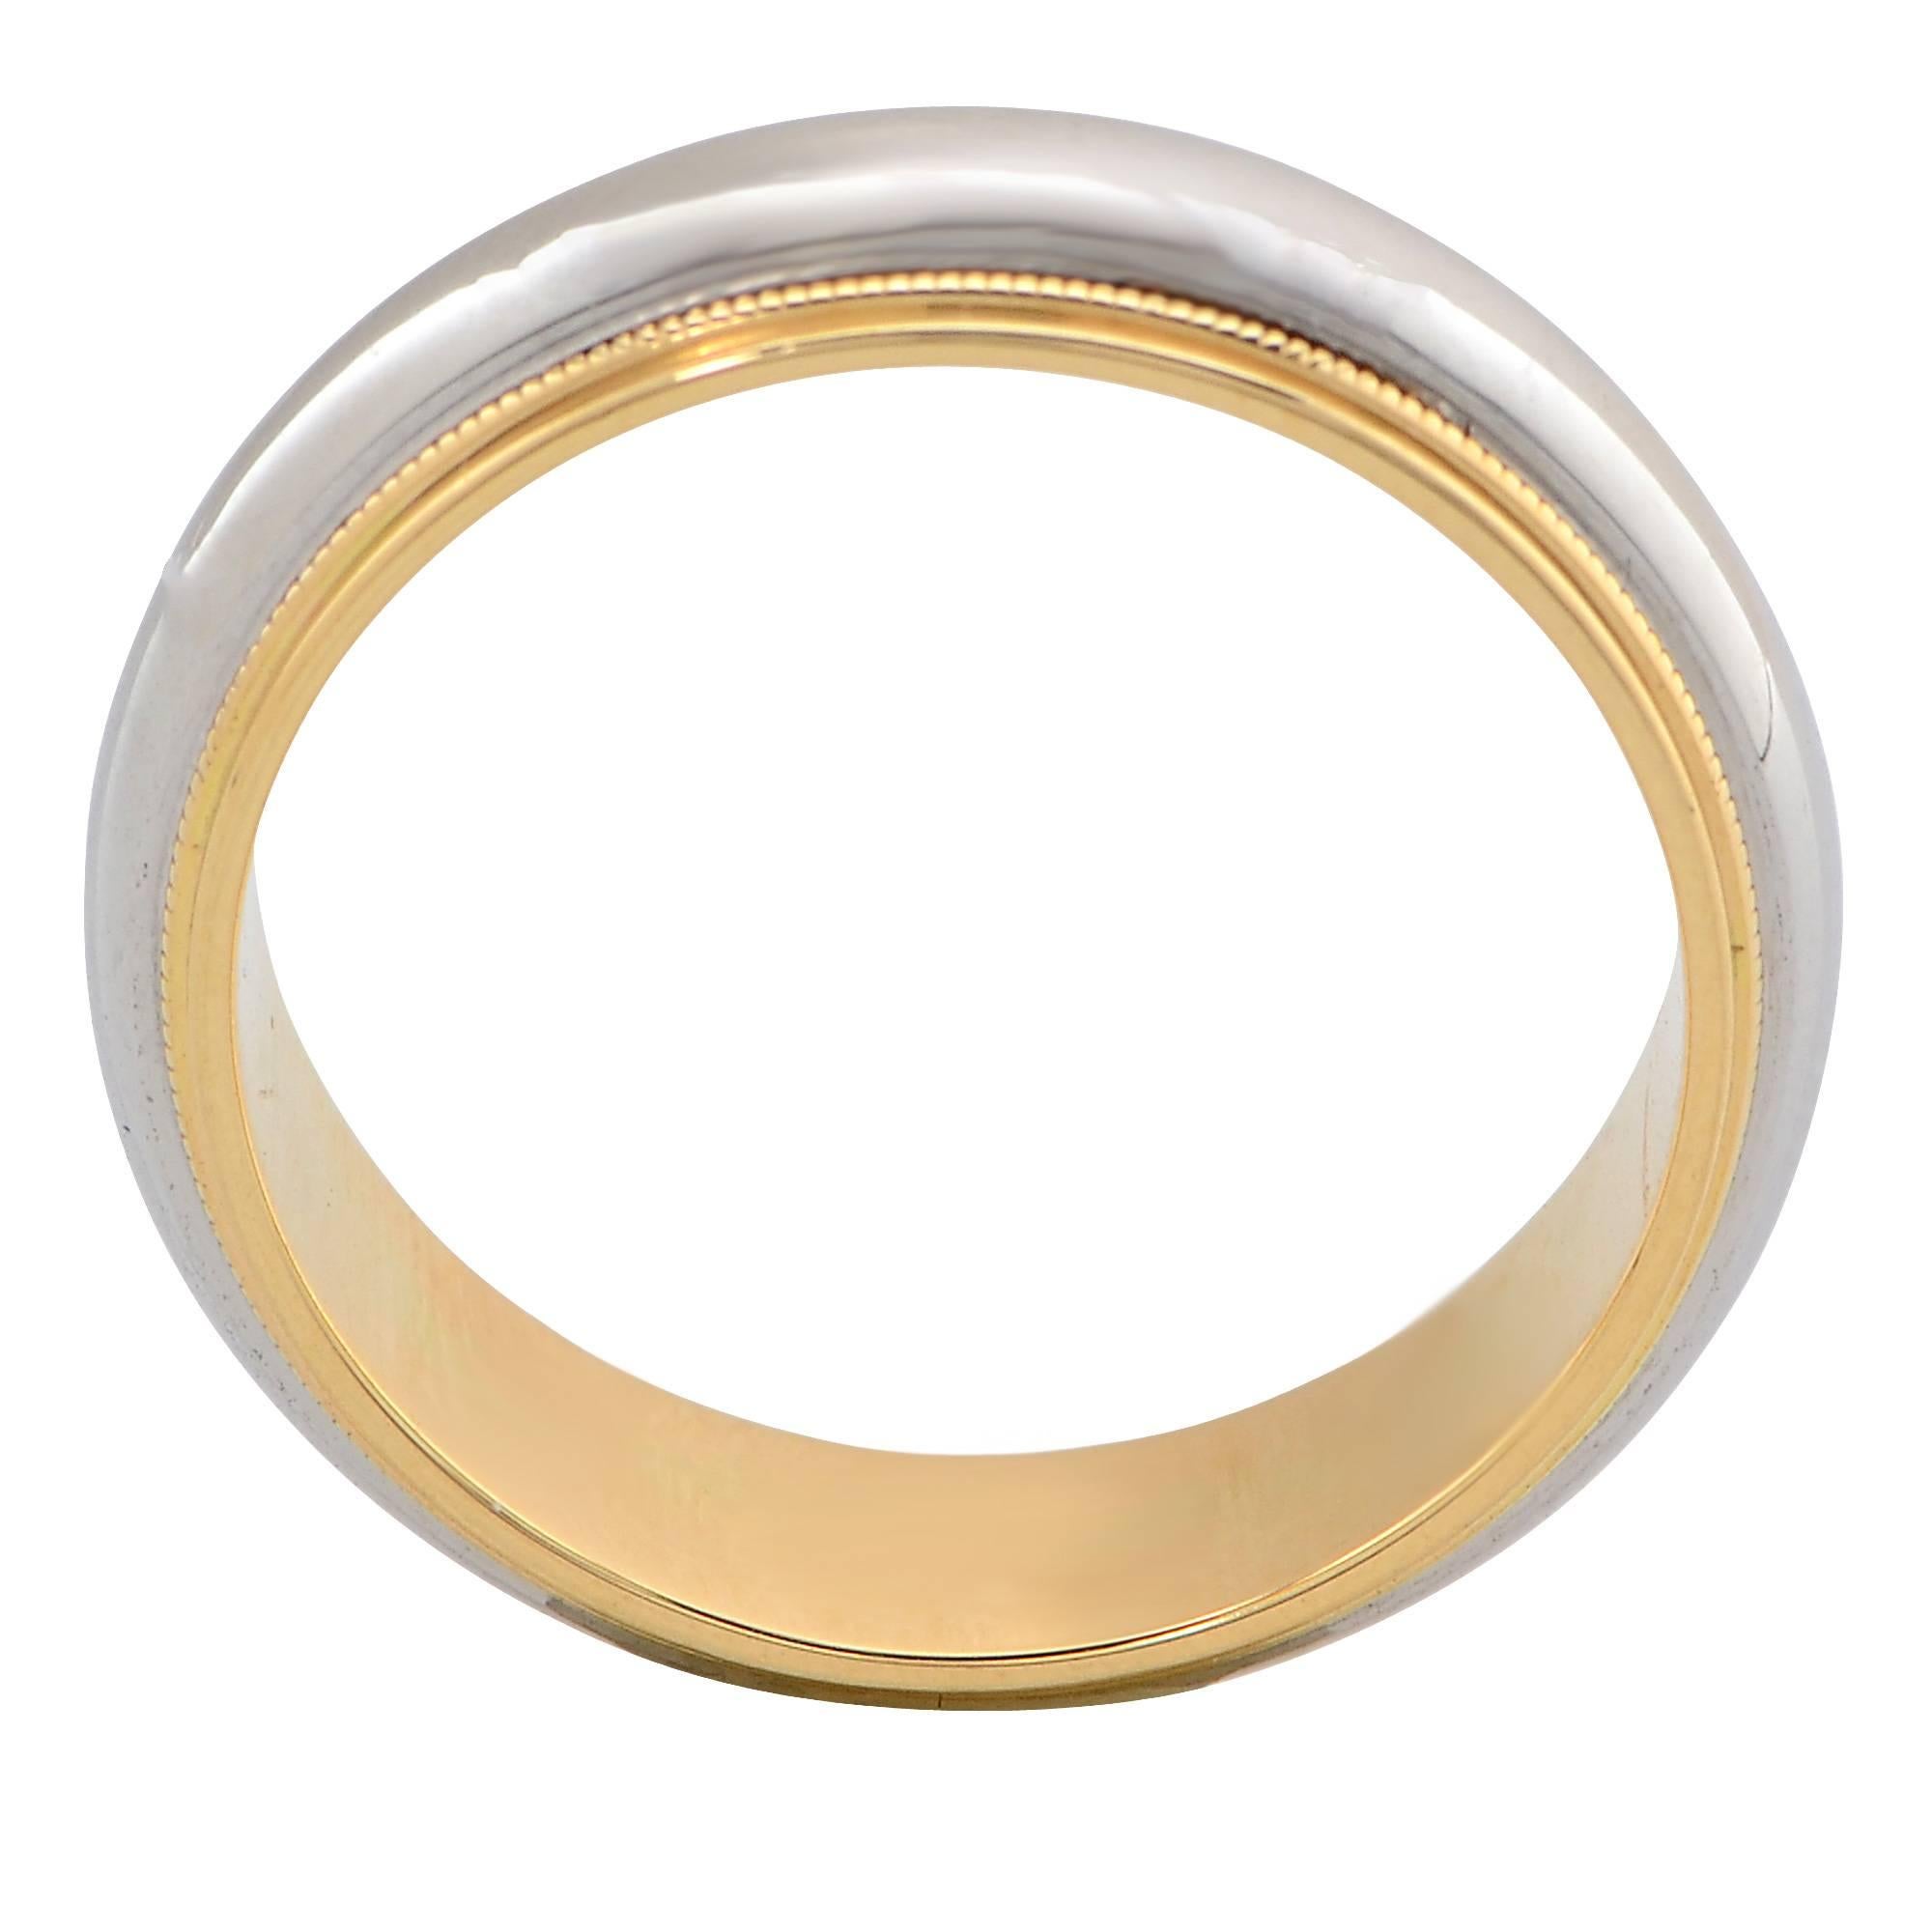 Tiffany & Co. Men's Platinum and Yellow Gold Band.

Ring Size: 8.25

This Ring is Accompanied by a Retail Appraisal Performed by an Accredited Gemologist.